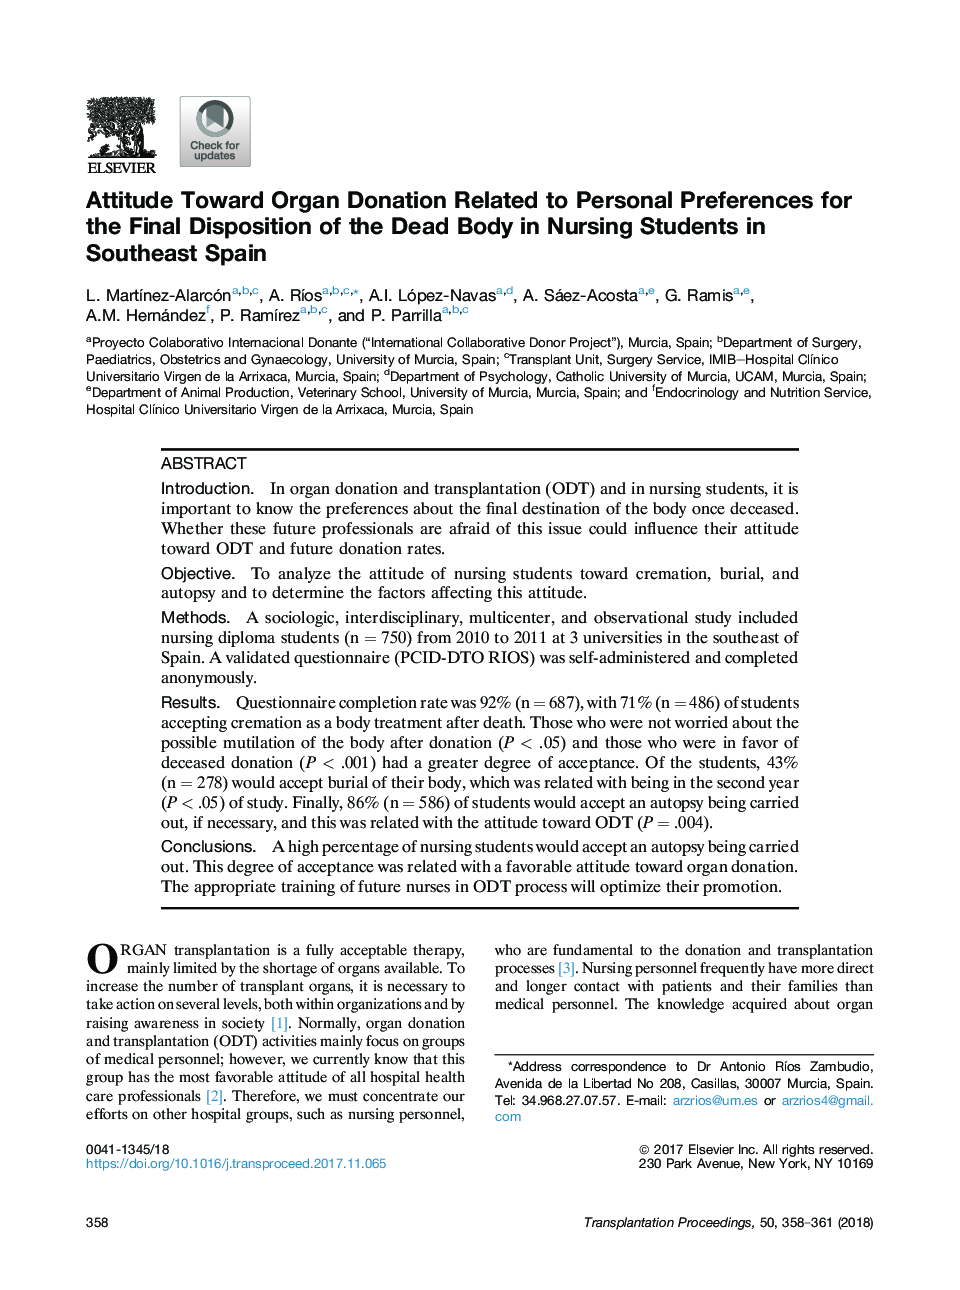 Attitude Toward Organ Donation Related to Personal Preferences for the Final Disposition of the Dead Body in Nursing Students in Southeast Spain